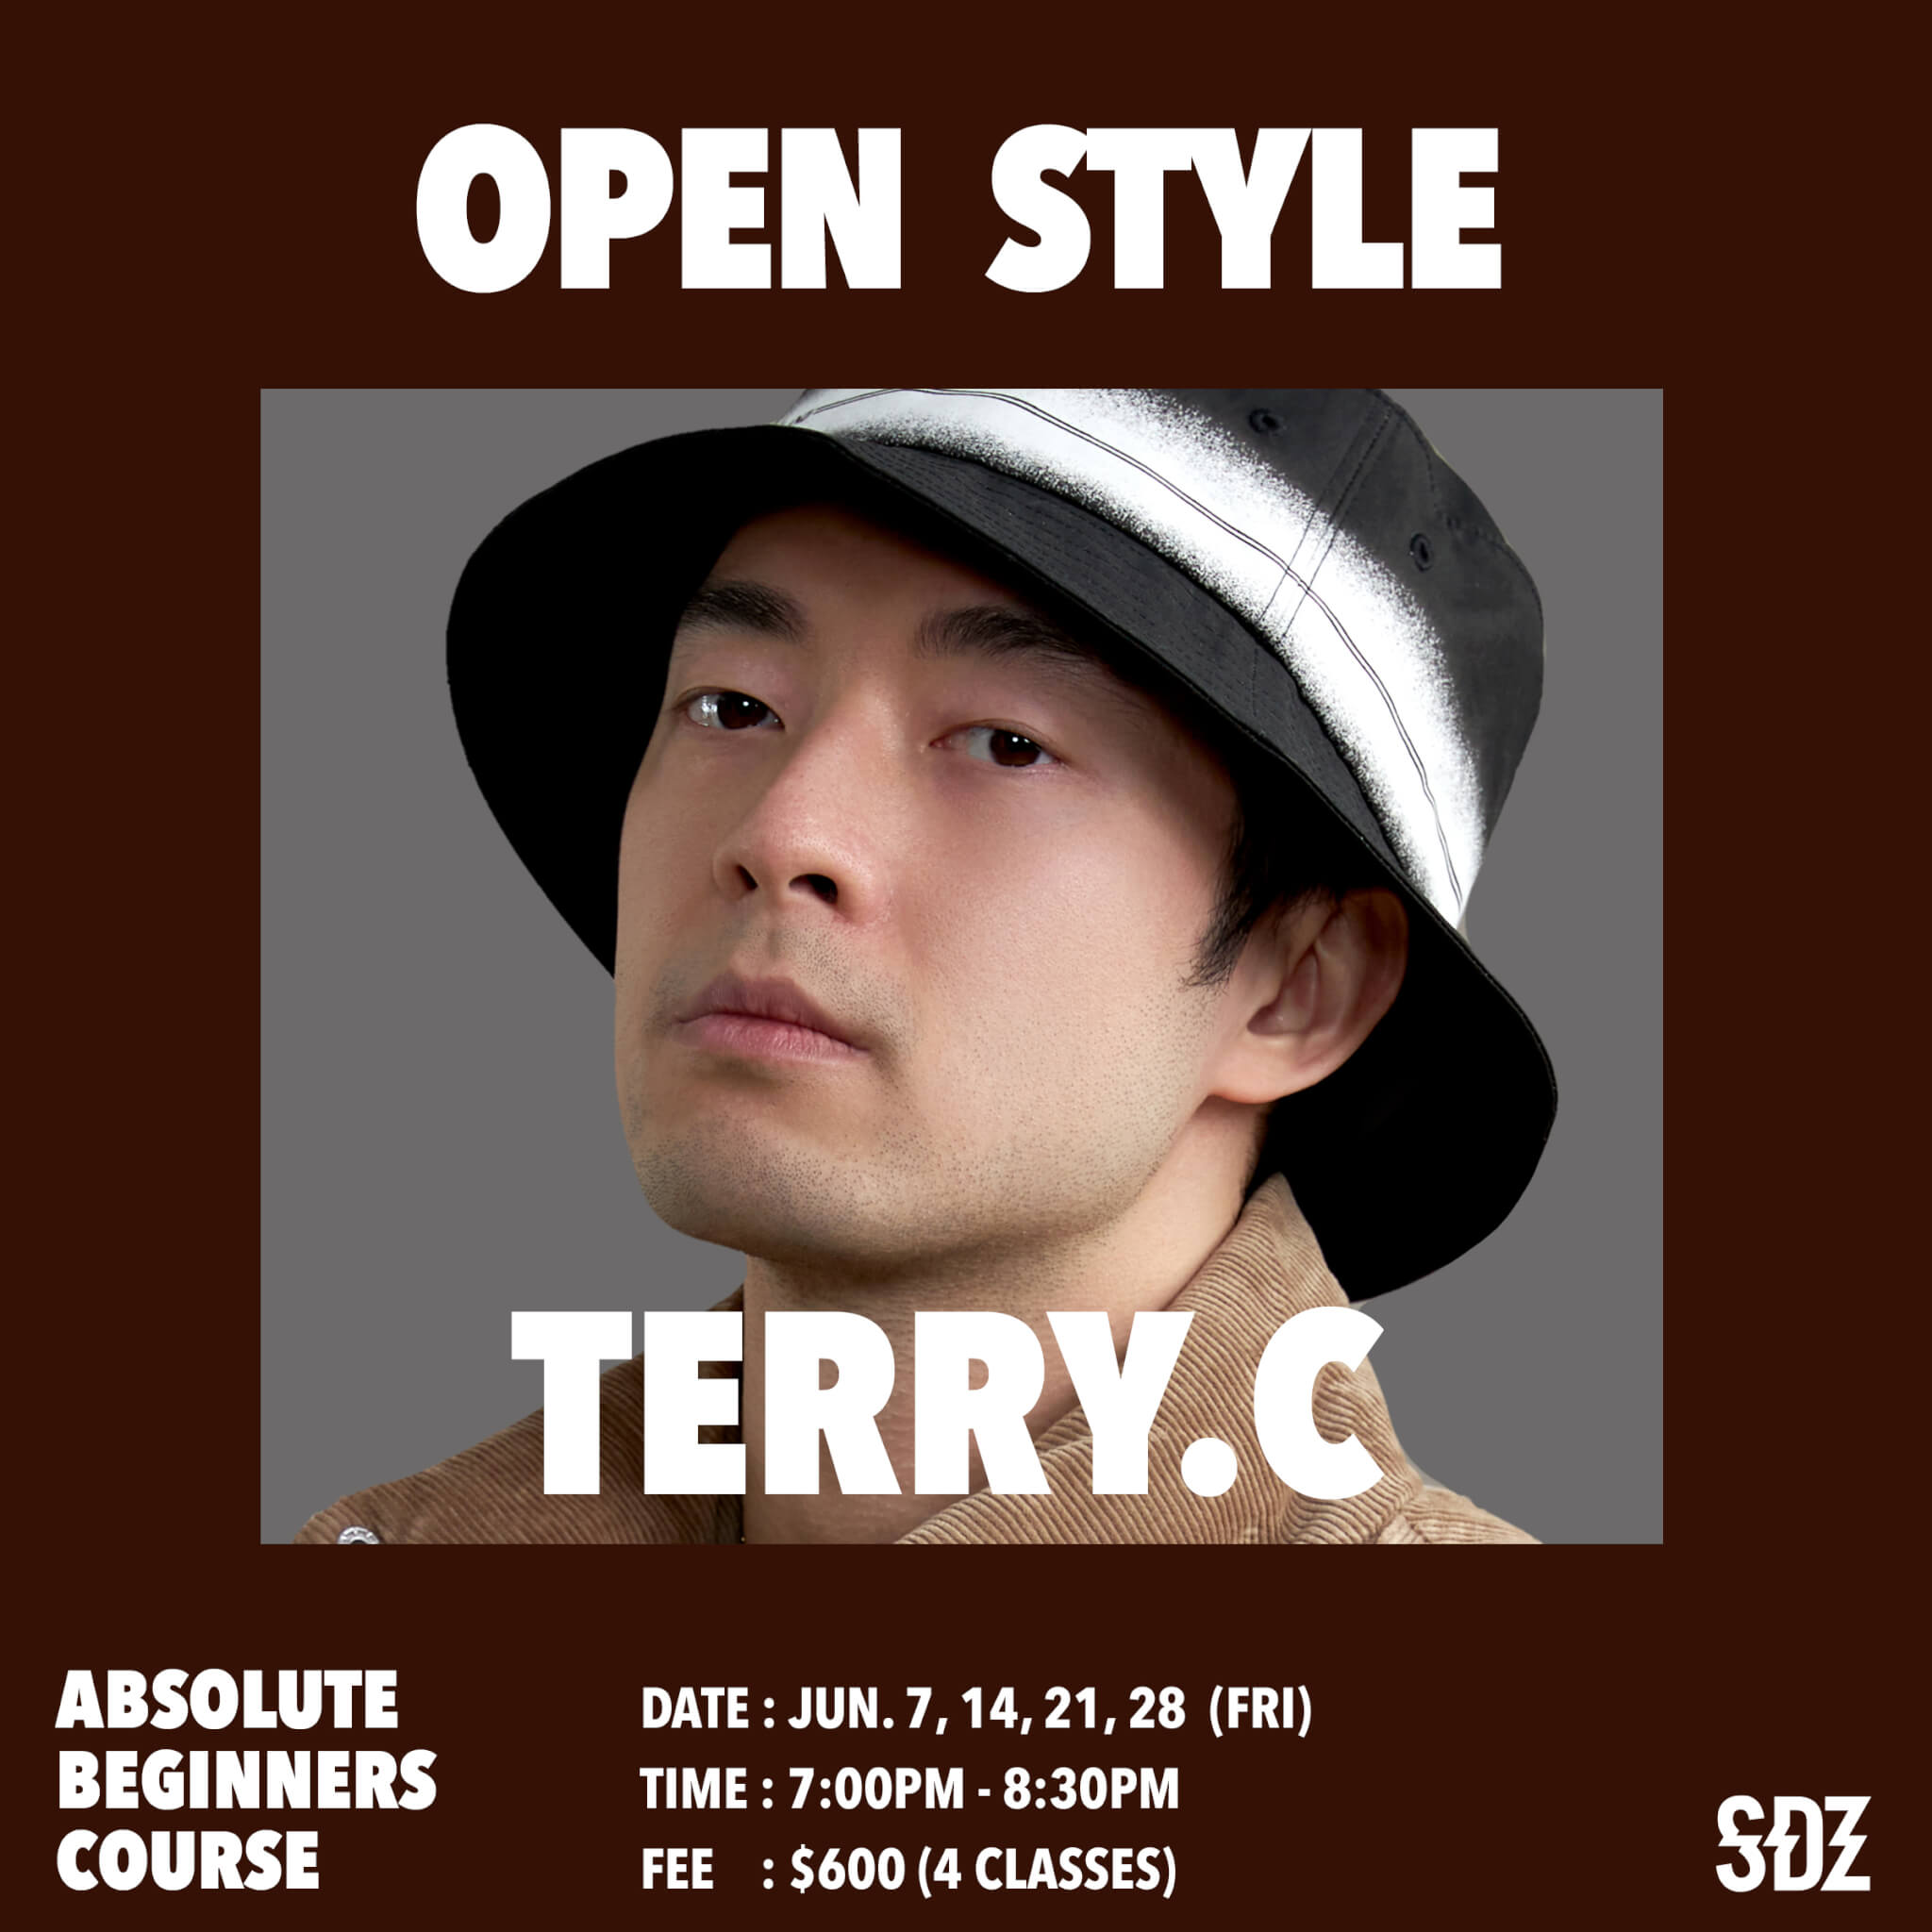 Absolute Beginners Course - Open Style - Terry.C (4 Classes)